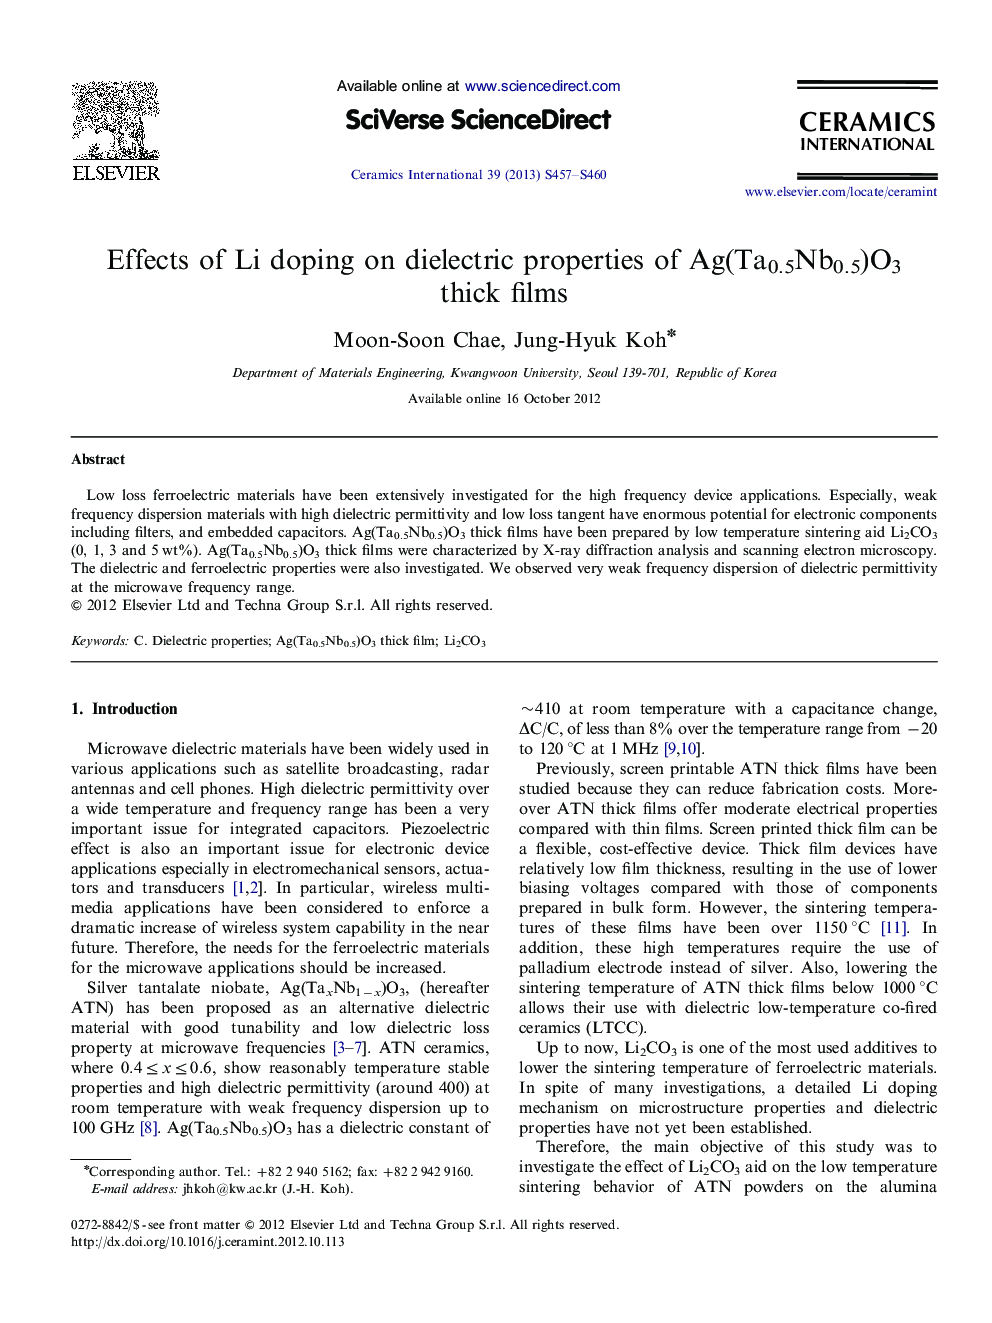 Effects of Li doping on dielectric properties of Ag(Ta0.5Nb0.5)O3 thick films